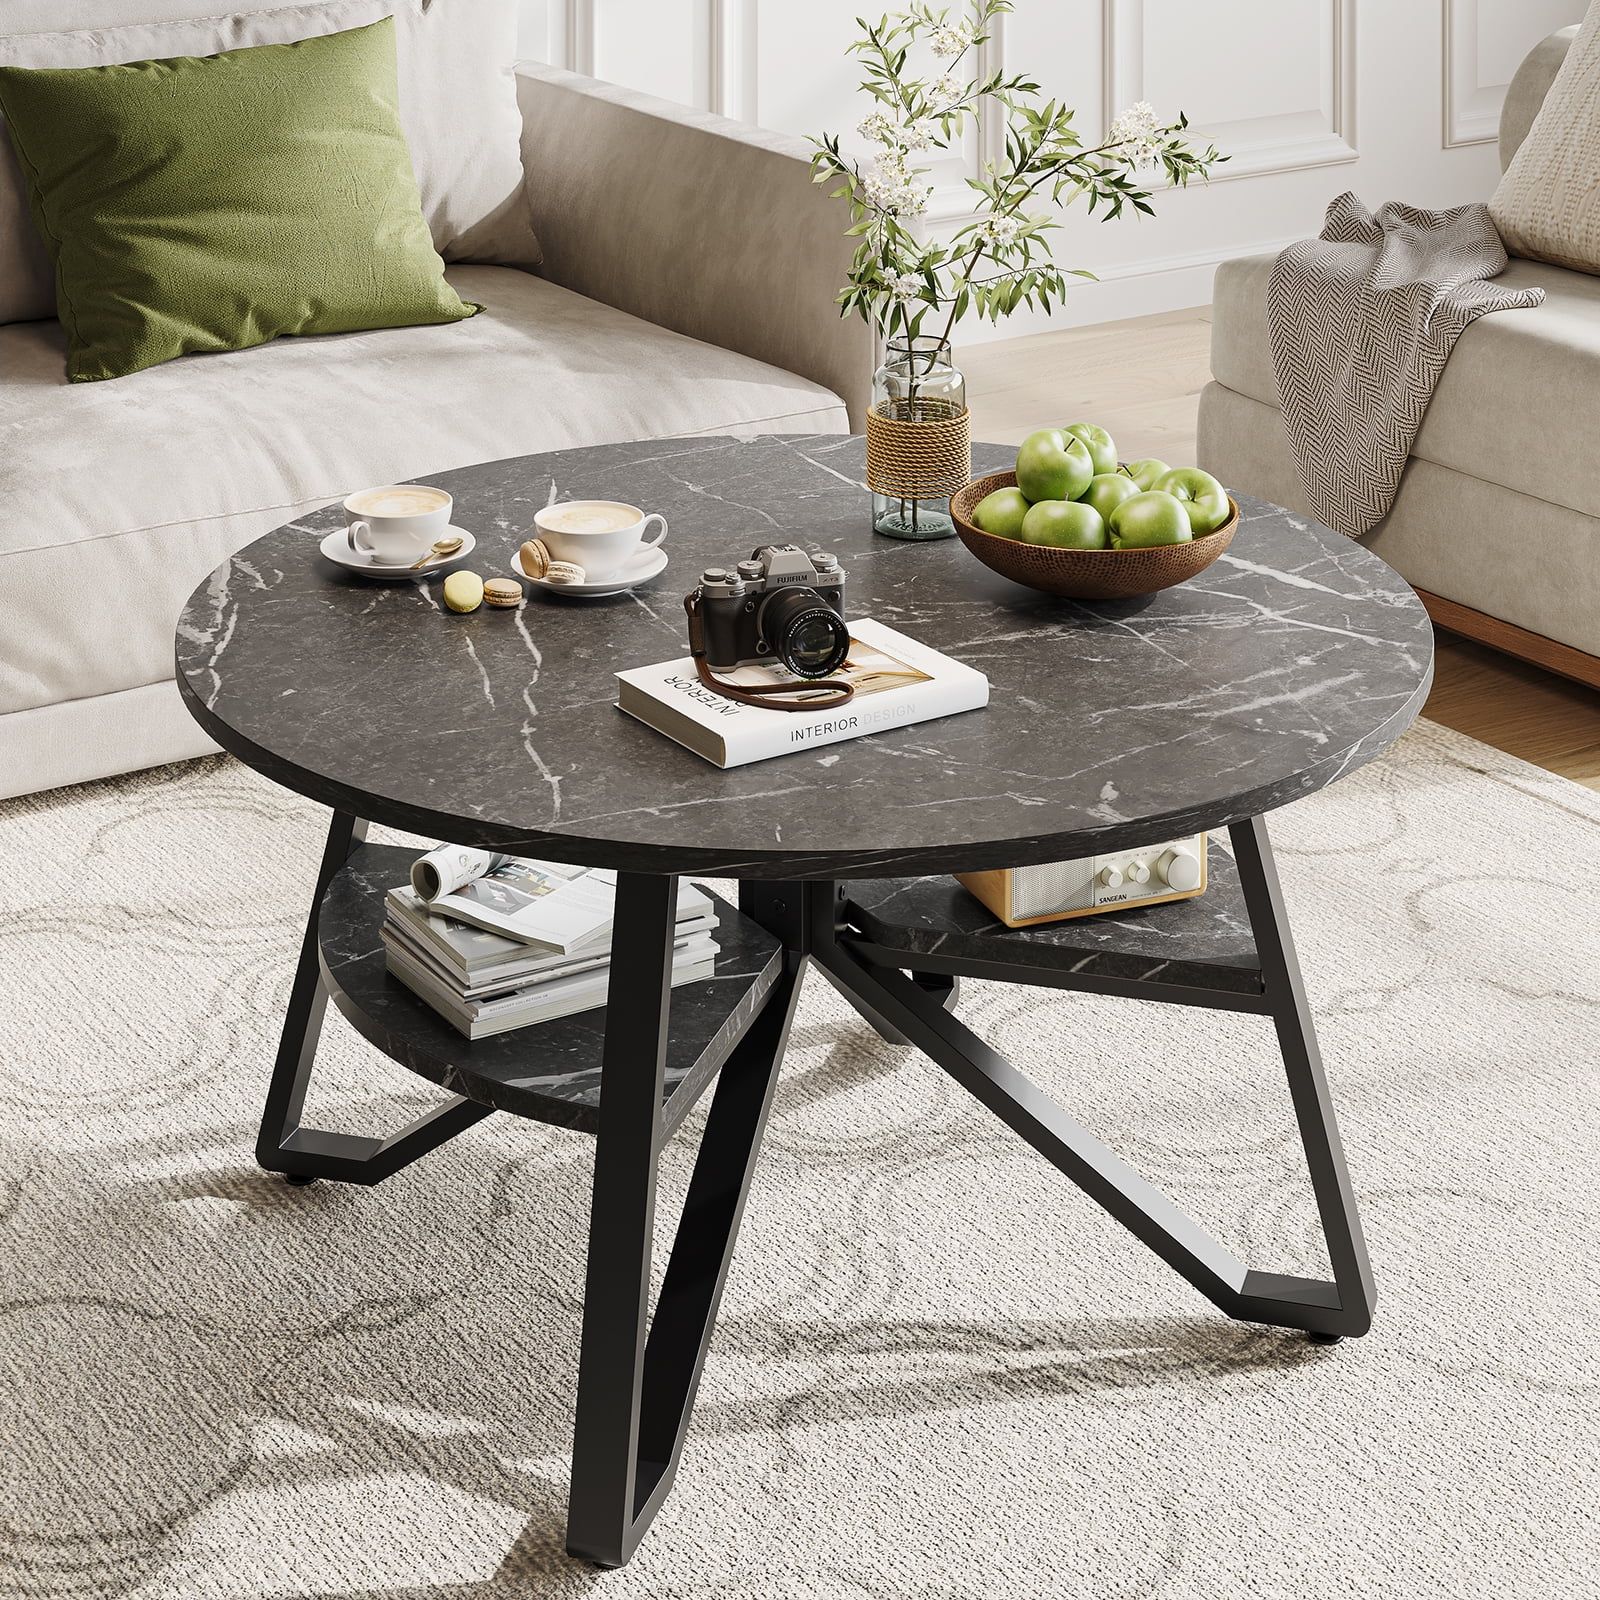 Bestier Round Coffee Table With Storage, Living Room Tables With Sturdy  Metal Legs, Retro Grey Oak – Walmart Inside Round Coffee Tables With Steel Frames (View 4 of 15)